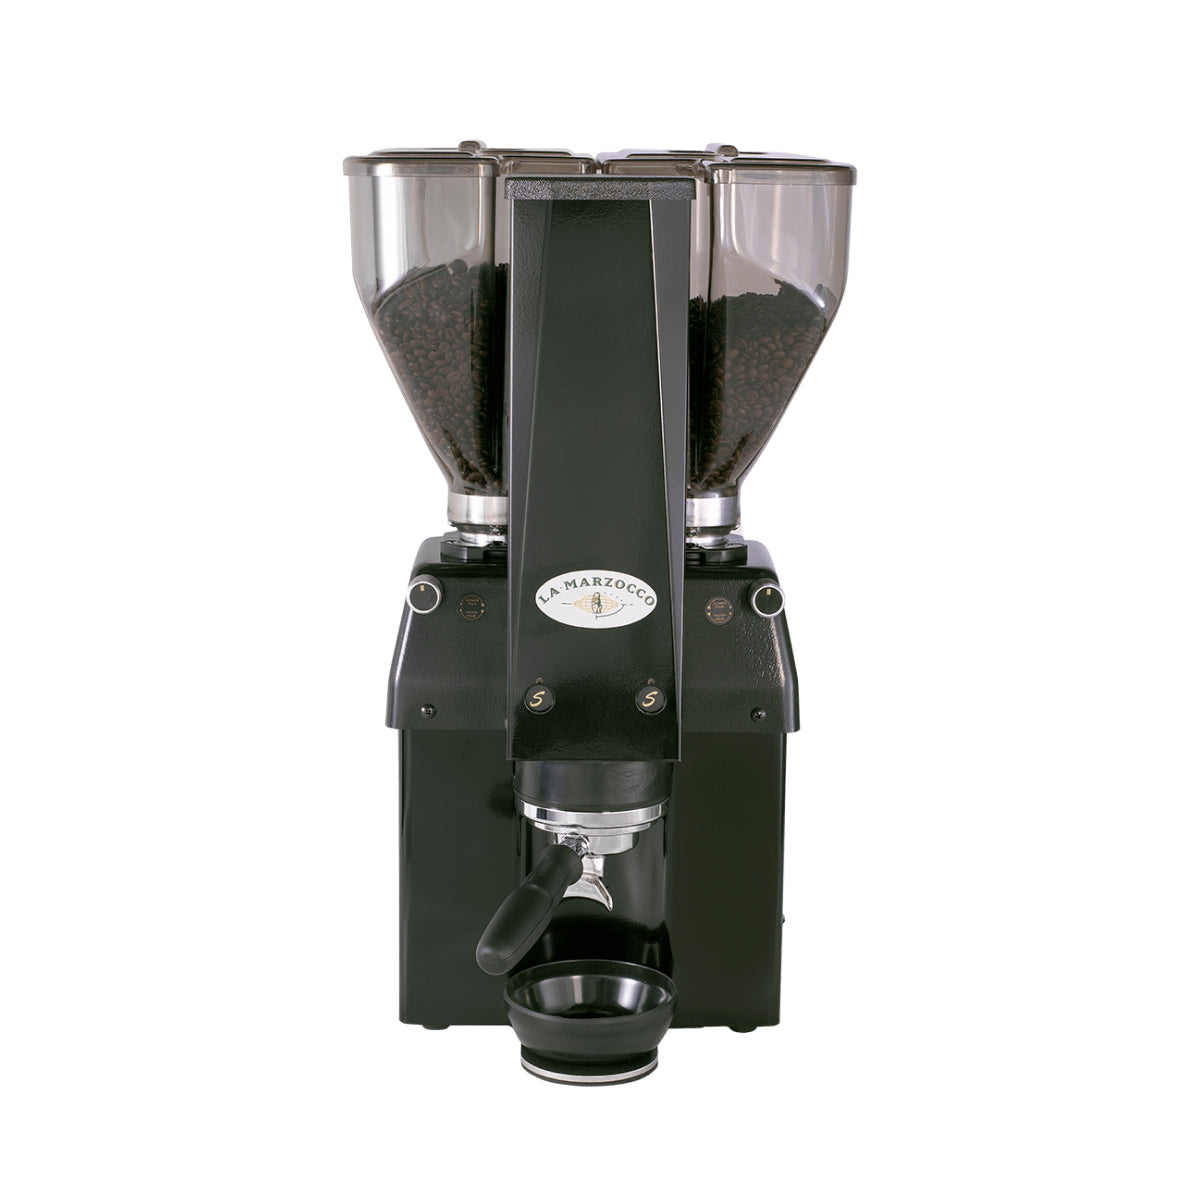 Get Beans on us, with purchase of select Breville Machines. Click here for more information!